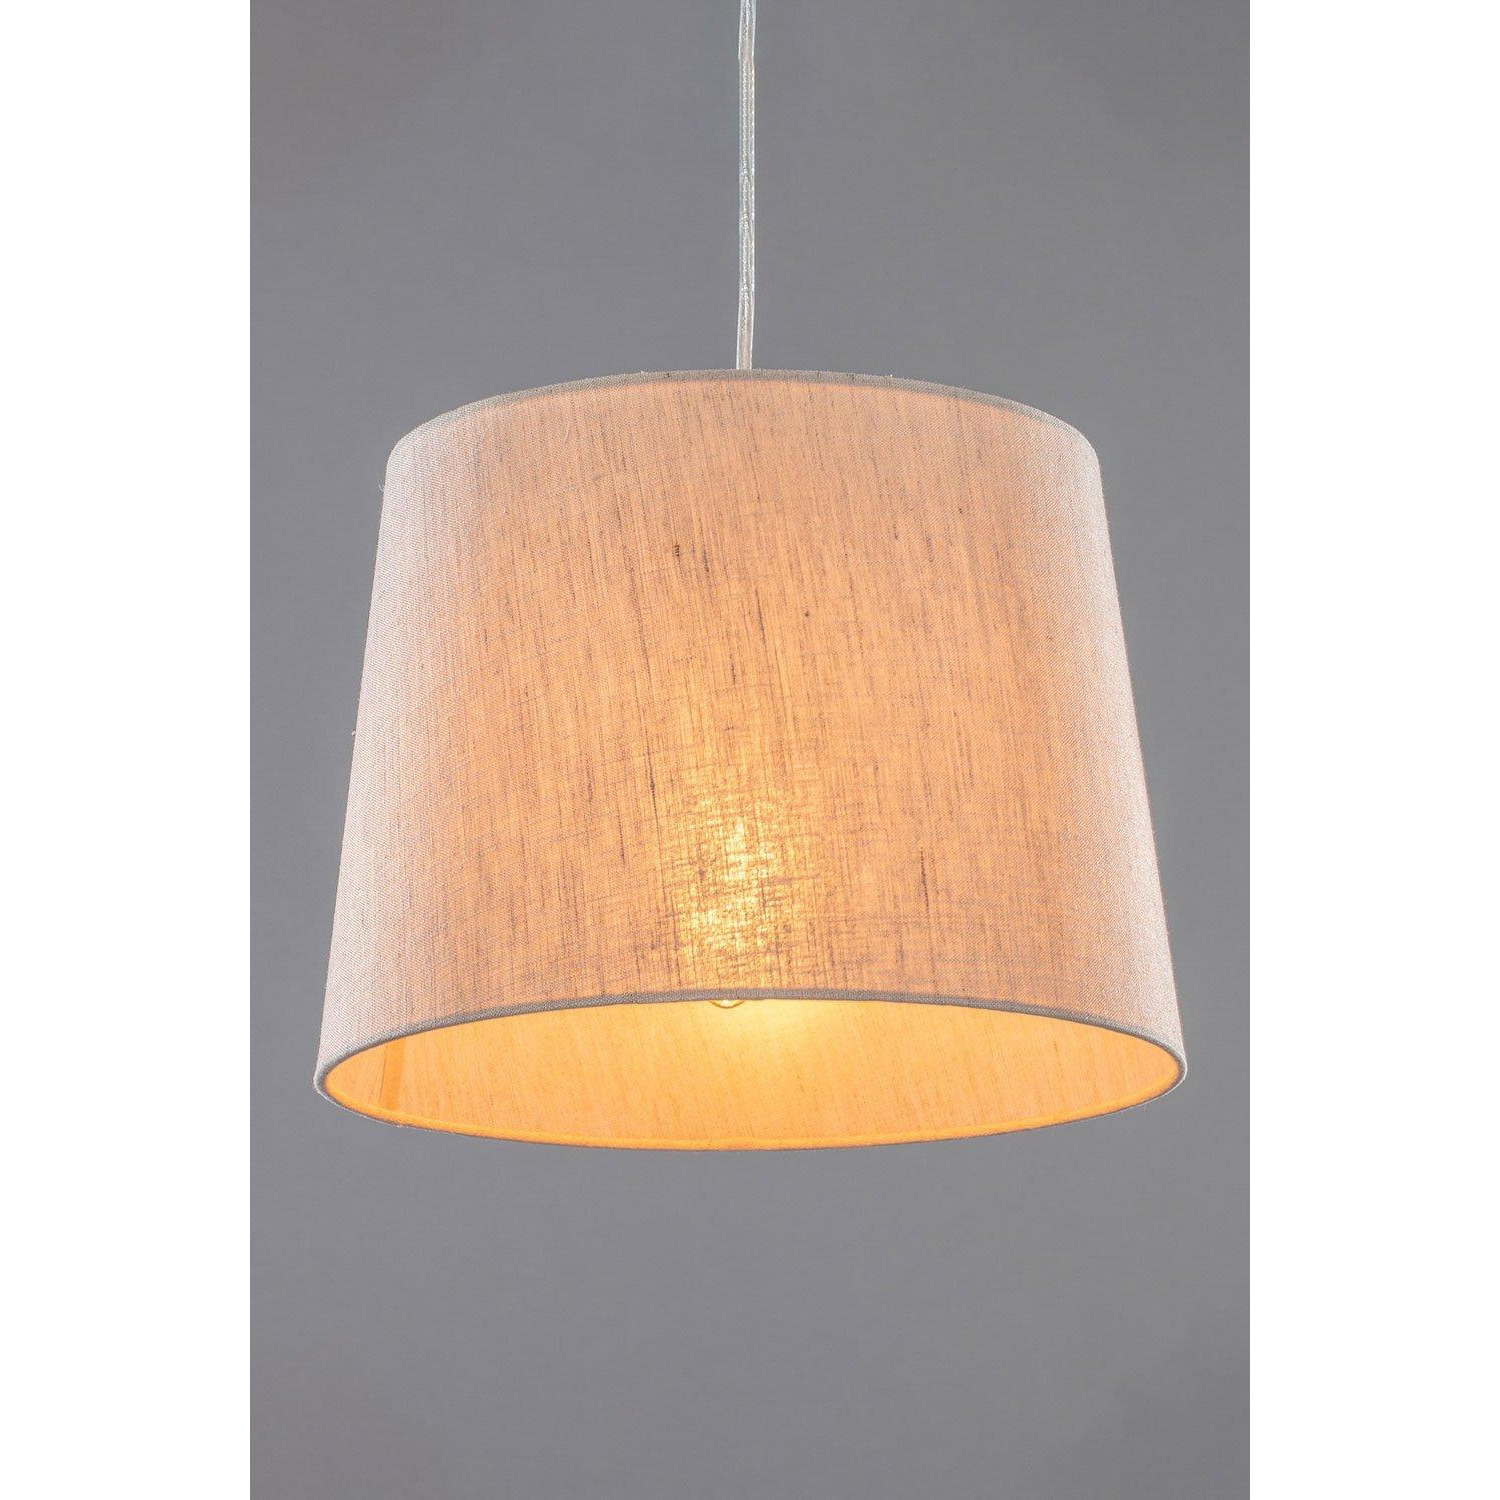 Lang Easy Fit Light Shade - image 1